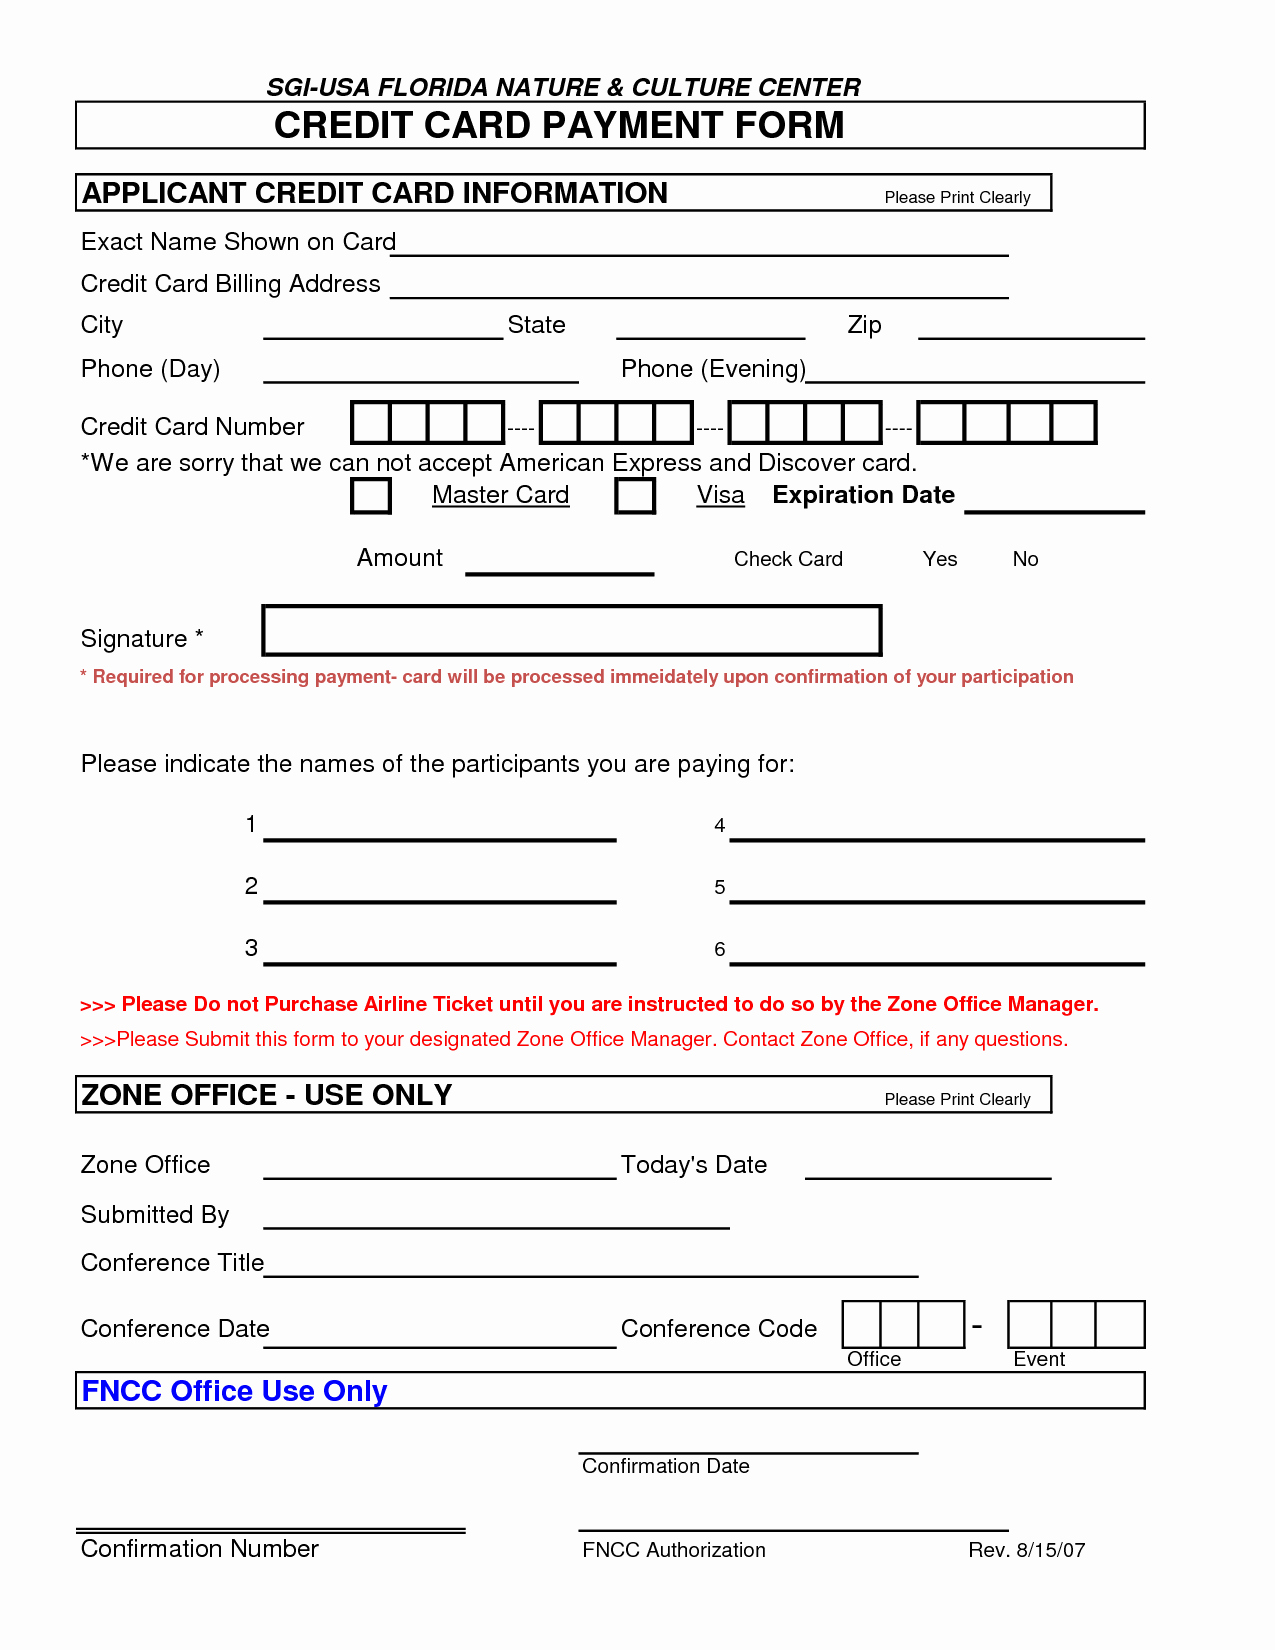 Credit Card Payment form Template Best Of 5 Credit Card Authorization form Templates formats